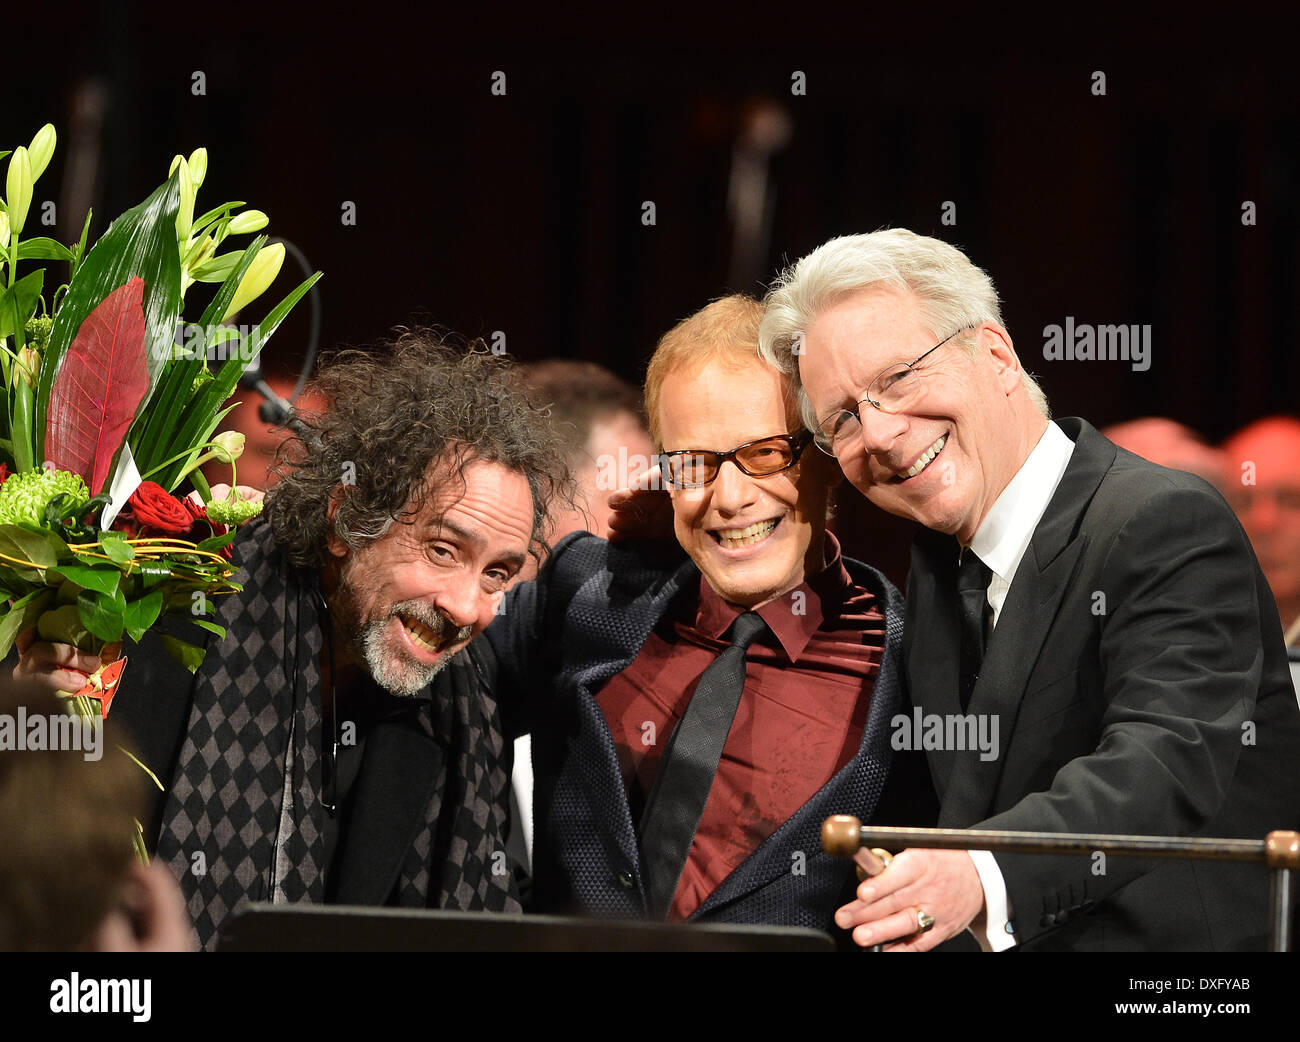 Prague, Czech Republic. 25th Mar, 2014. Composer Danny Elfman, center, US  famous filmmaker Tim Burton, left, and conductor John Mauceri react during  the concert the Danny Elfman's Music from the Films of